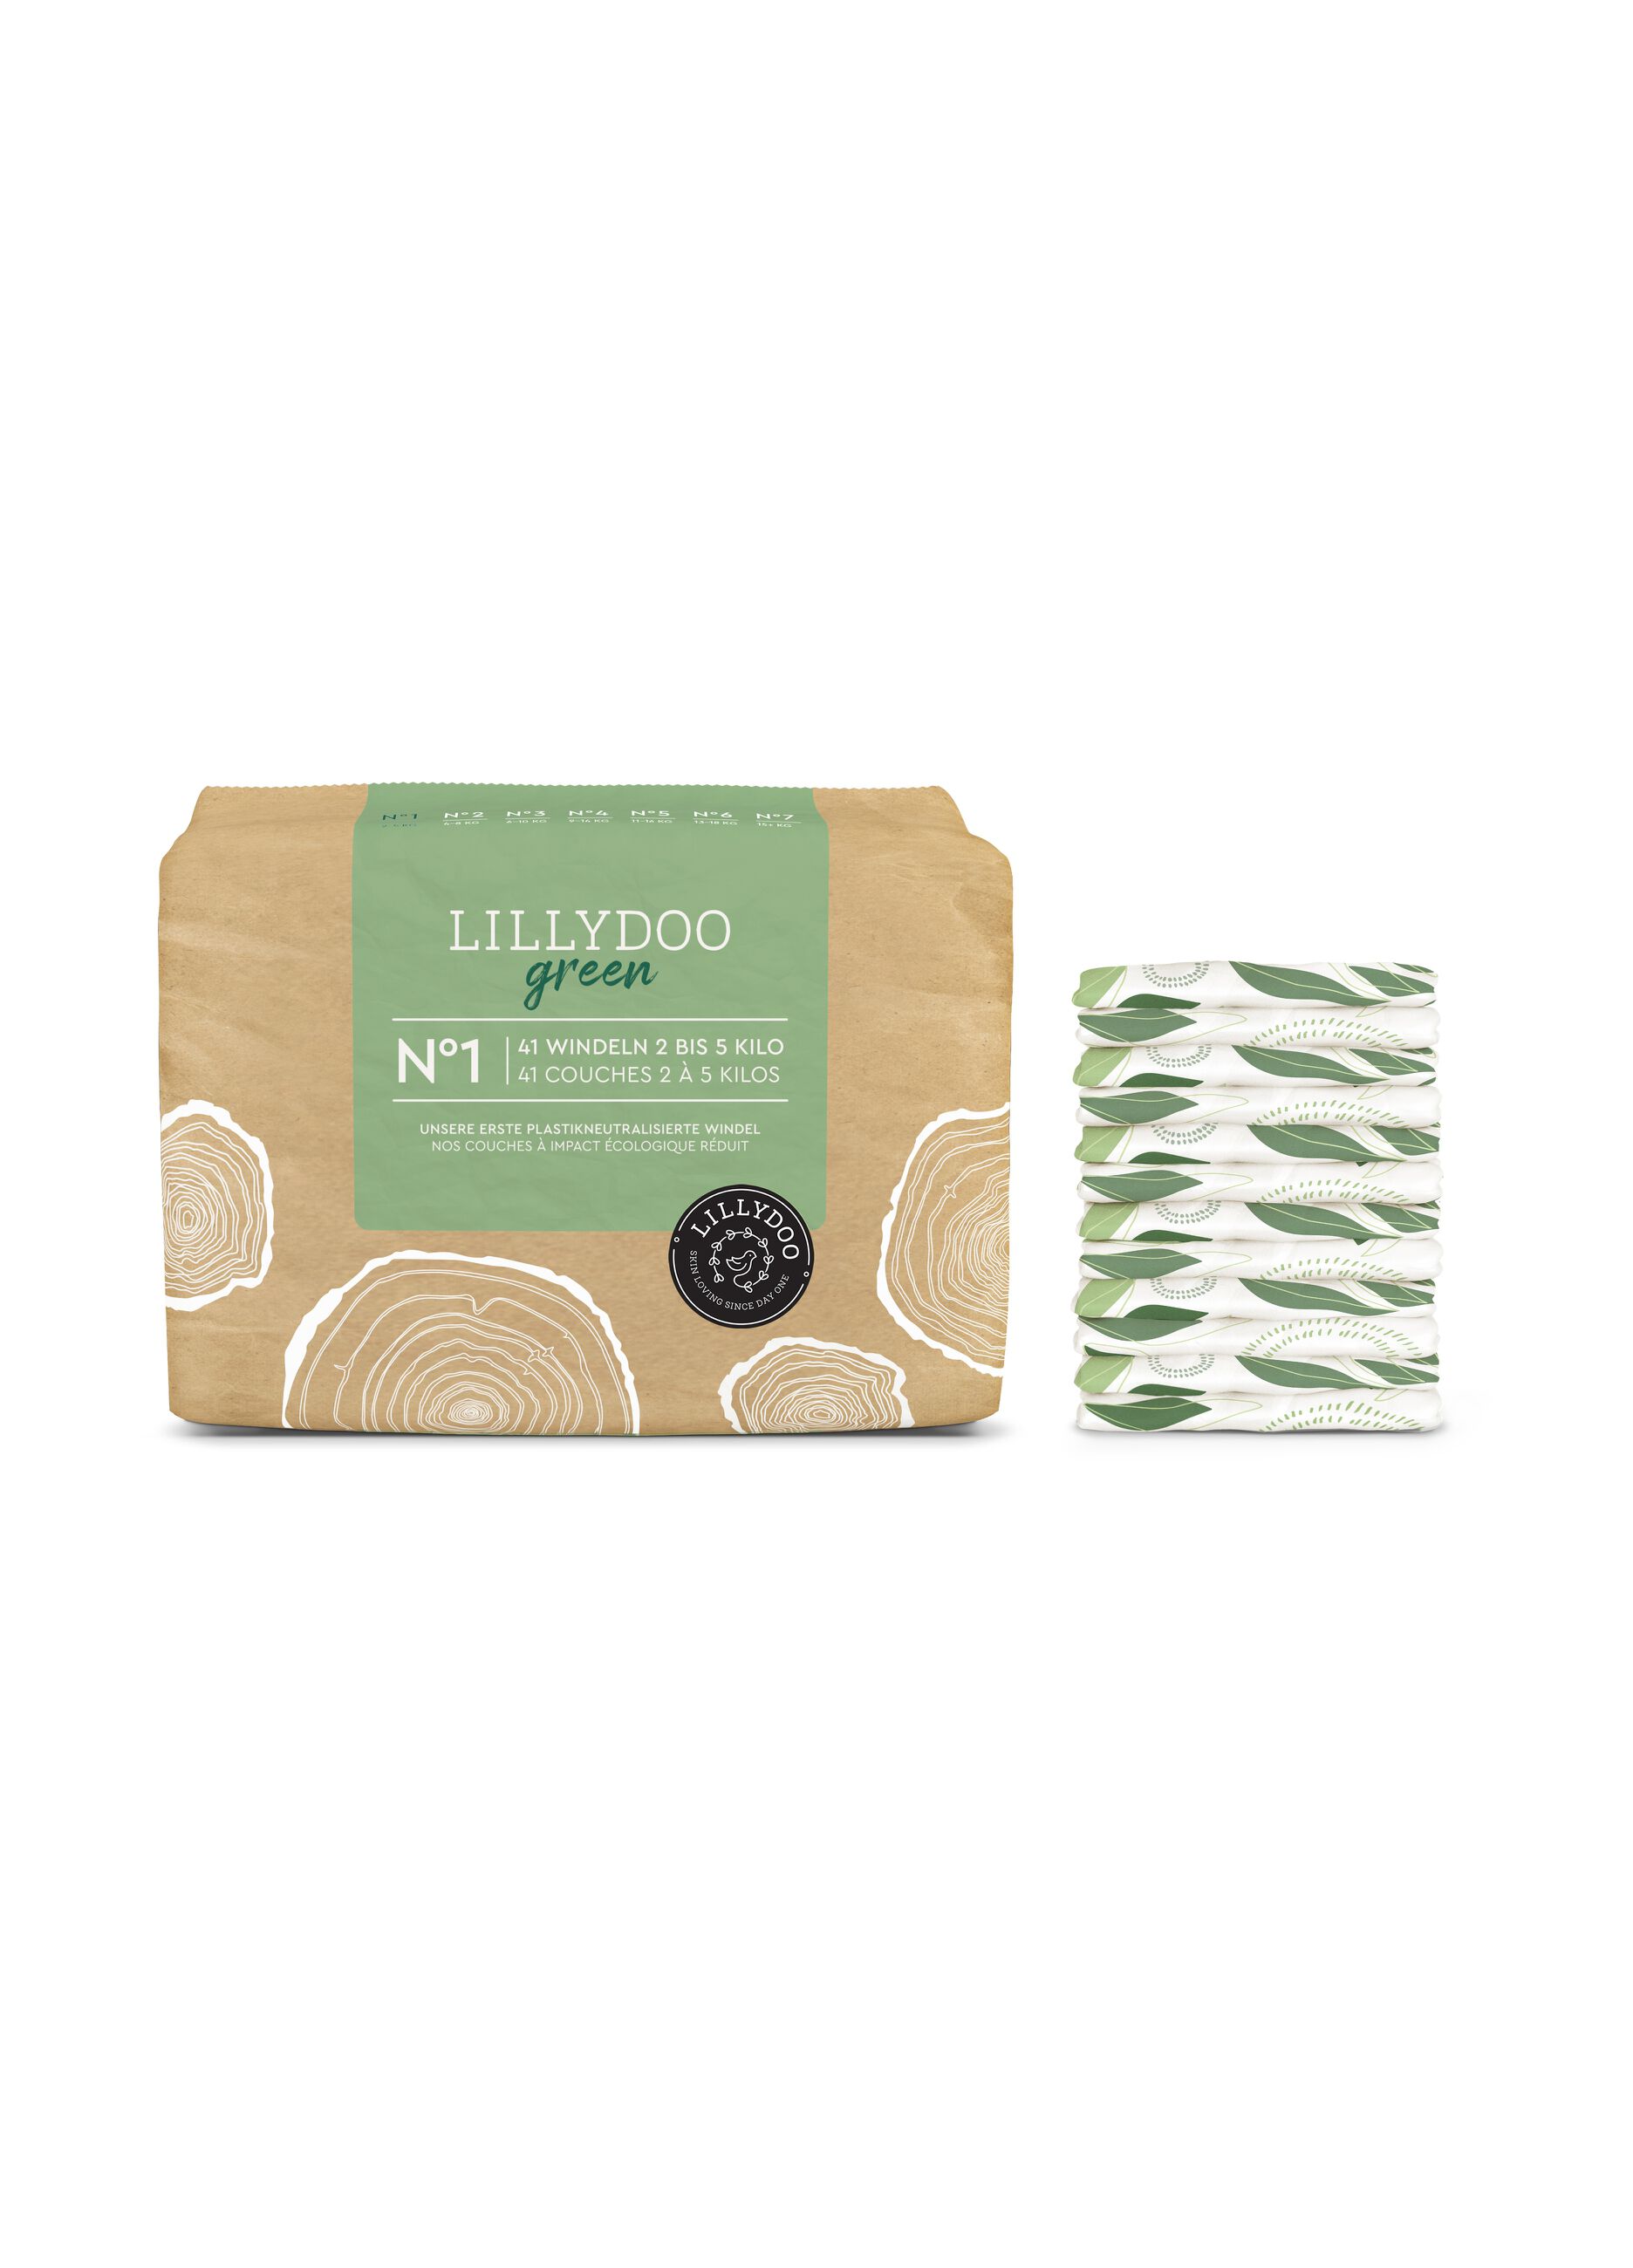 Pañales ecosostenibles N° 1 (2-5 kg) Lillydoo